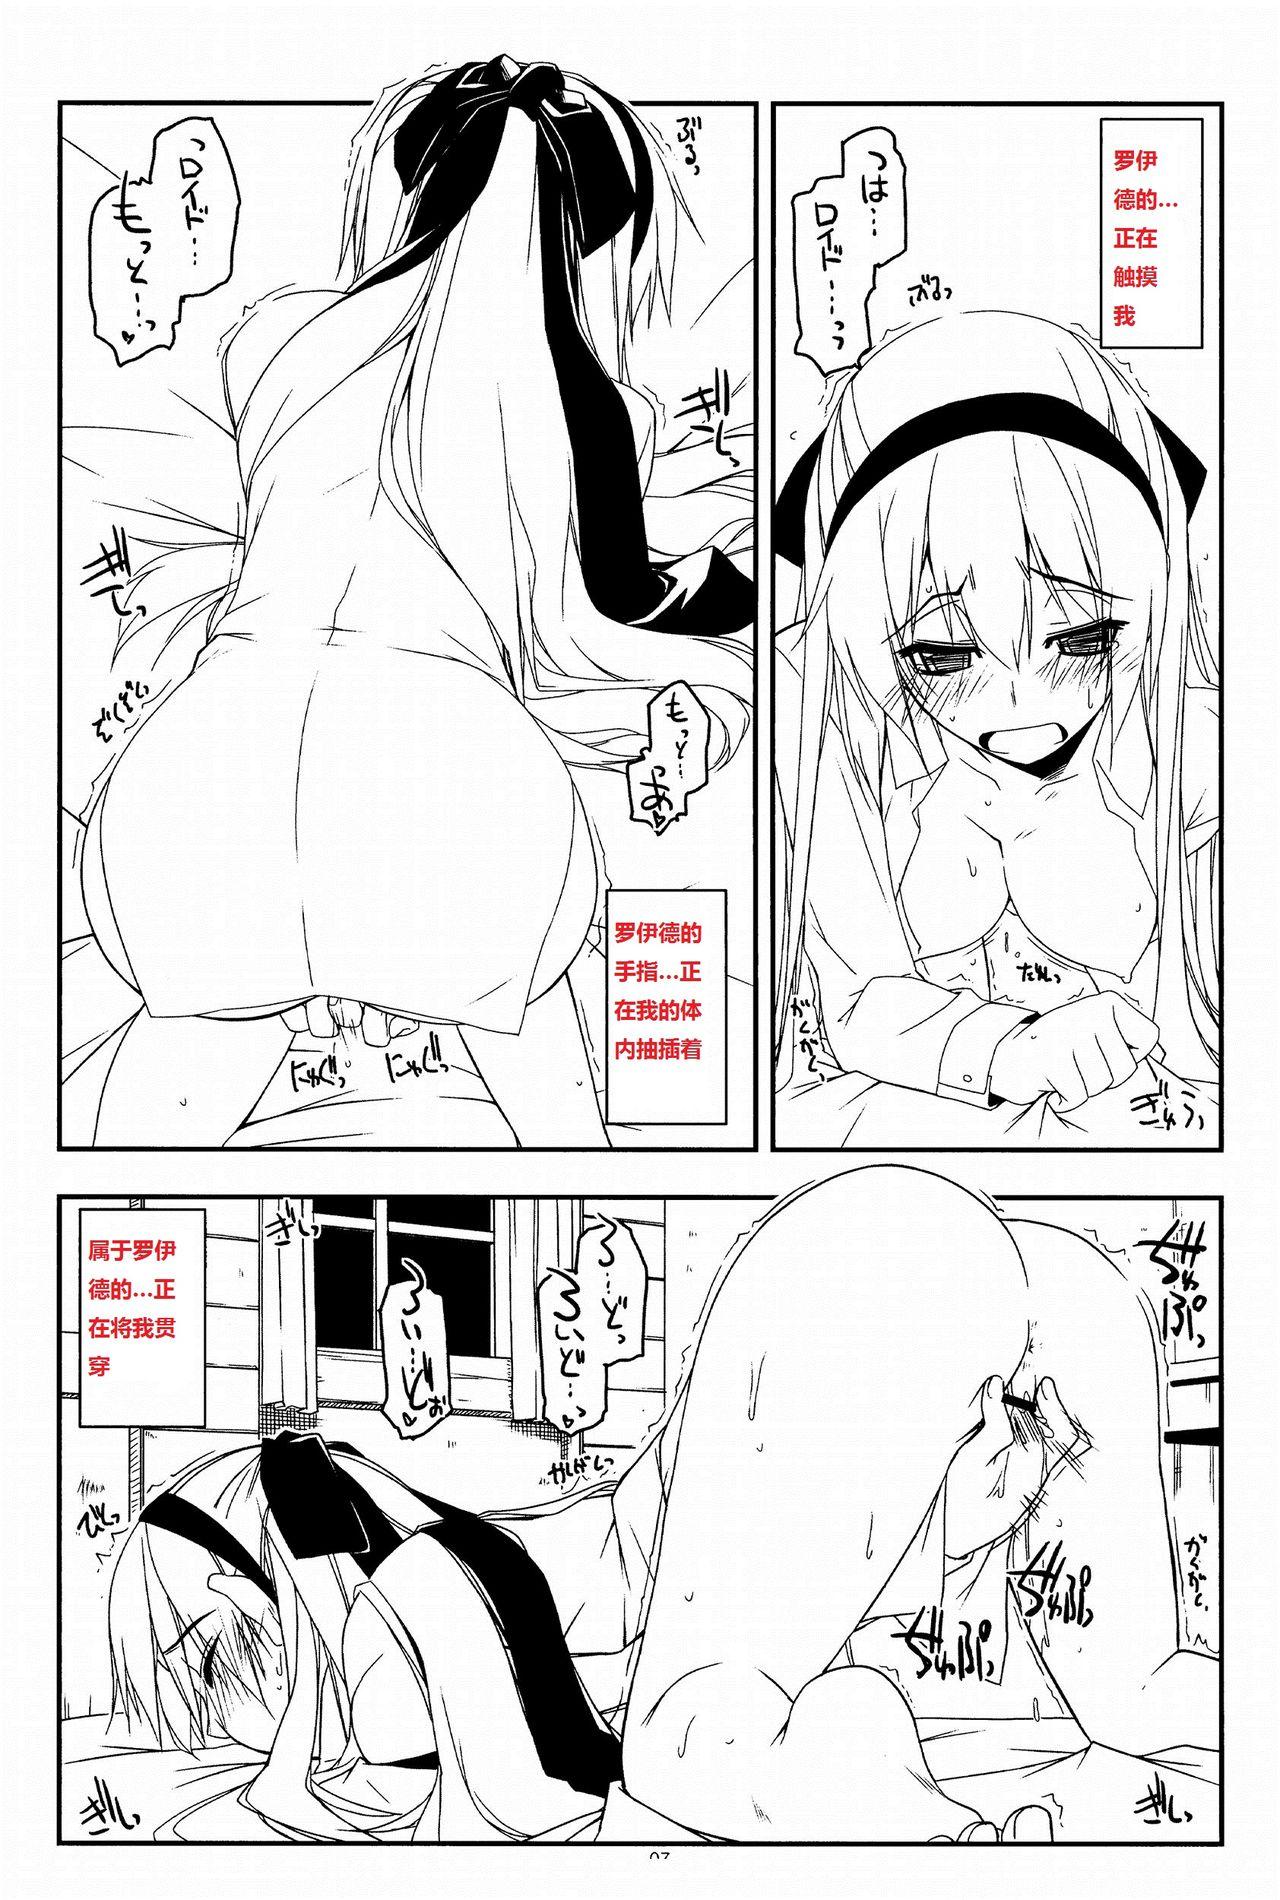 Massage Creep Extra15 - The legend of heroes Hardcore Sex - Page 6